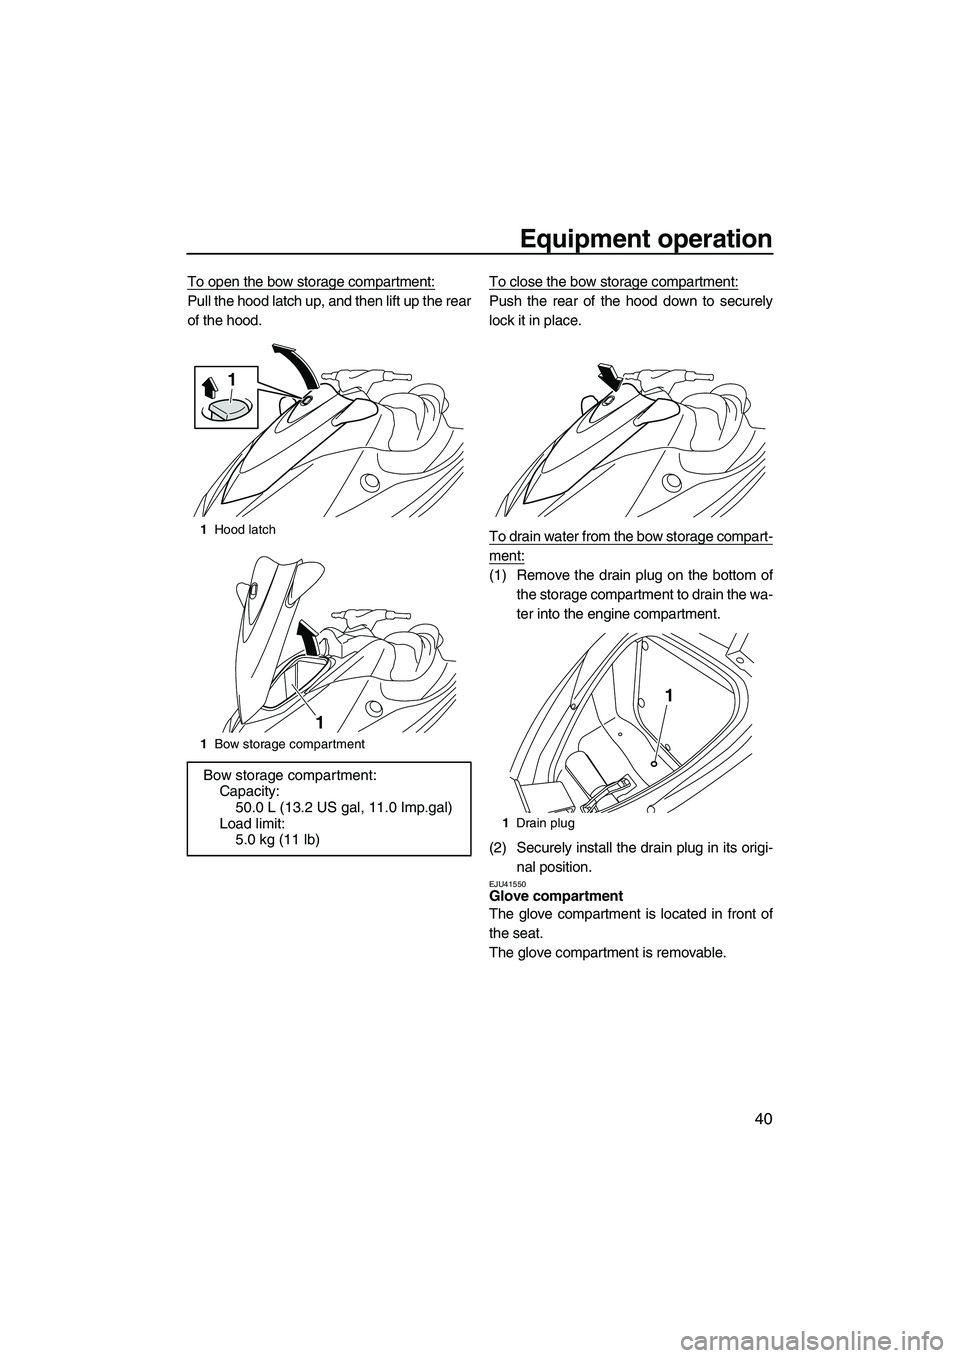 YAMAHA VX SPORT 2010 Service Manual Equipment operation
40
To open the bow storage compartment:
Pull the hood latch up, and then lift up the rear
of the hood.To close the bow storage compartment:Push the rear of the hood down to securel